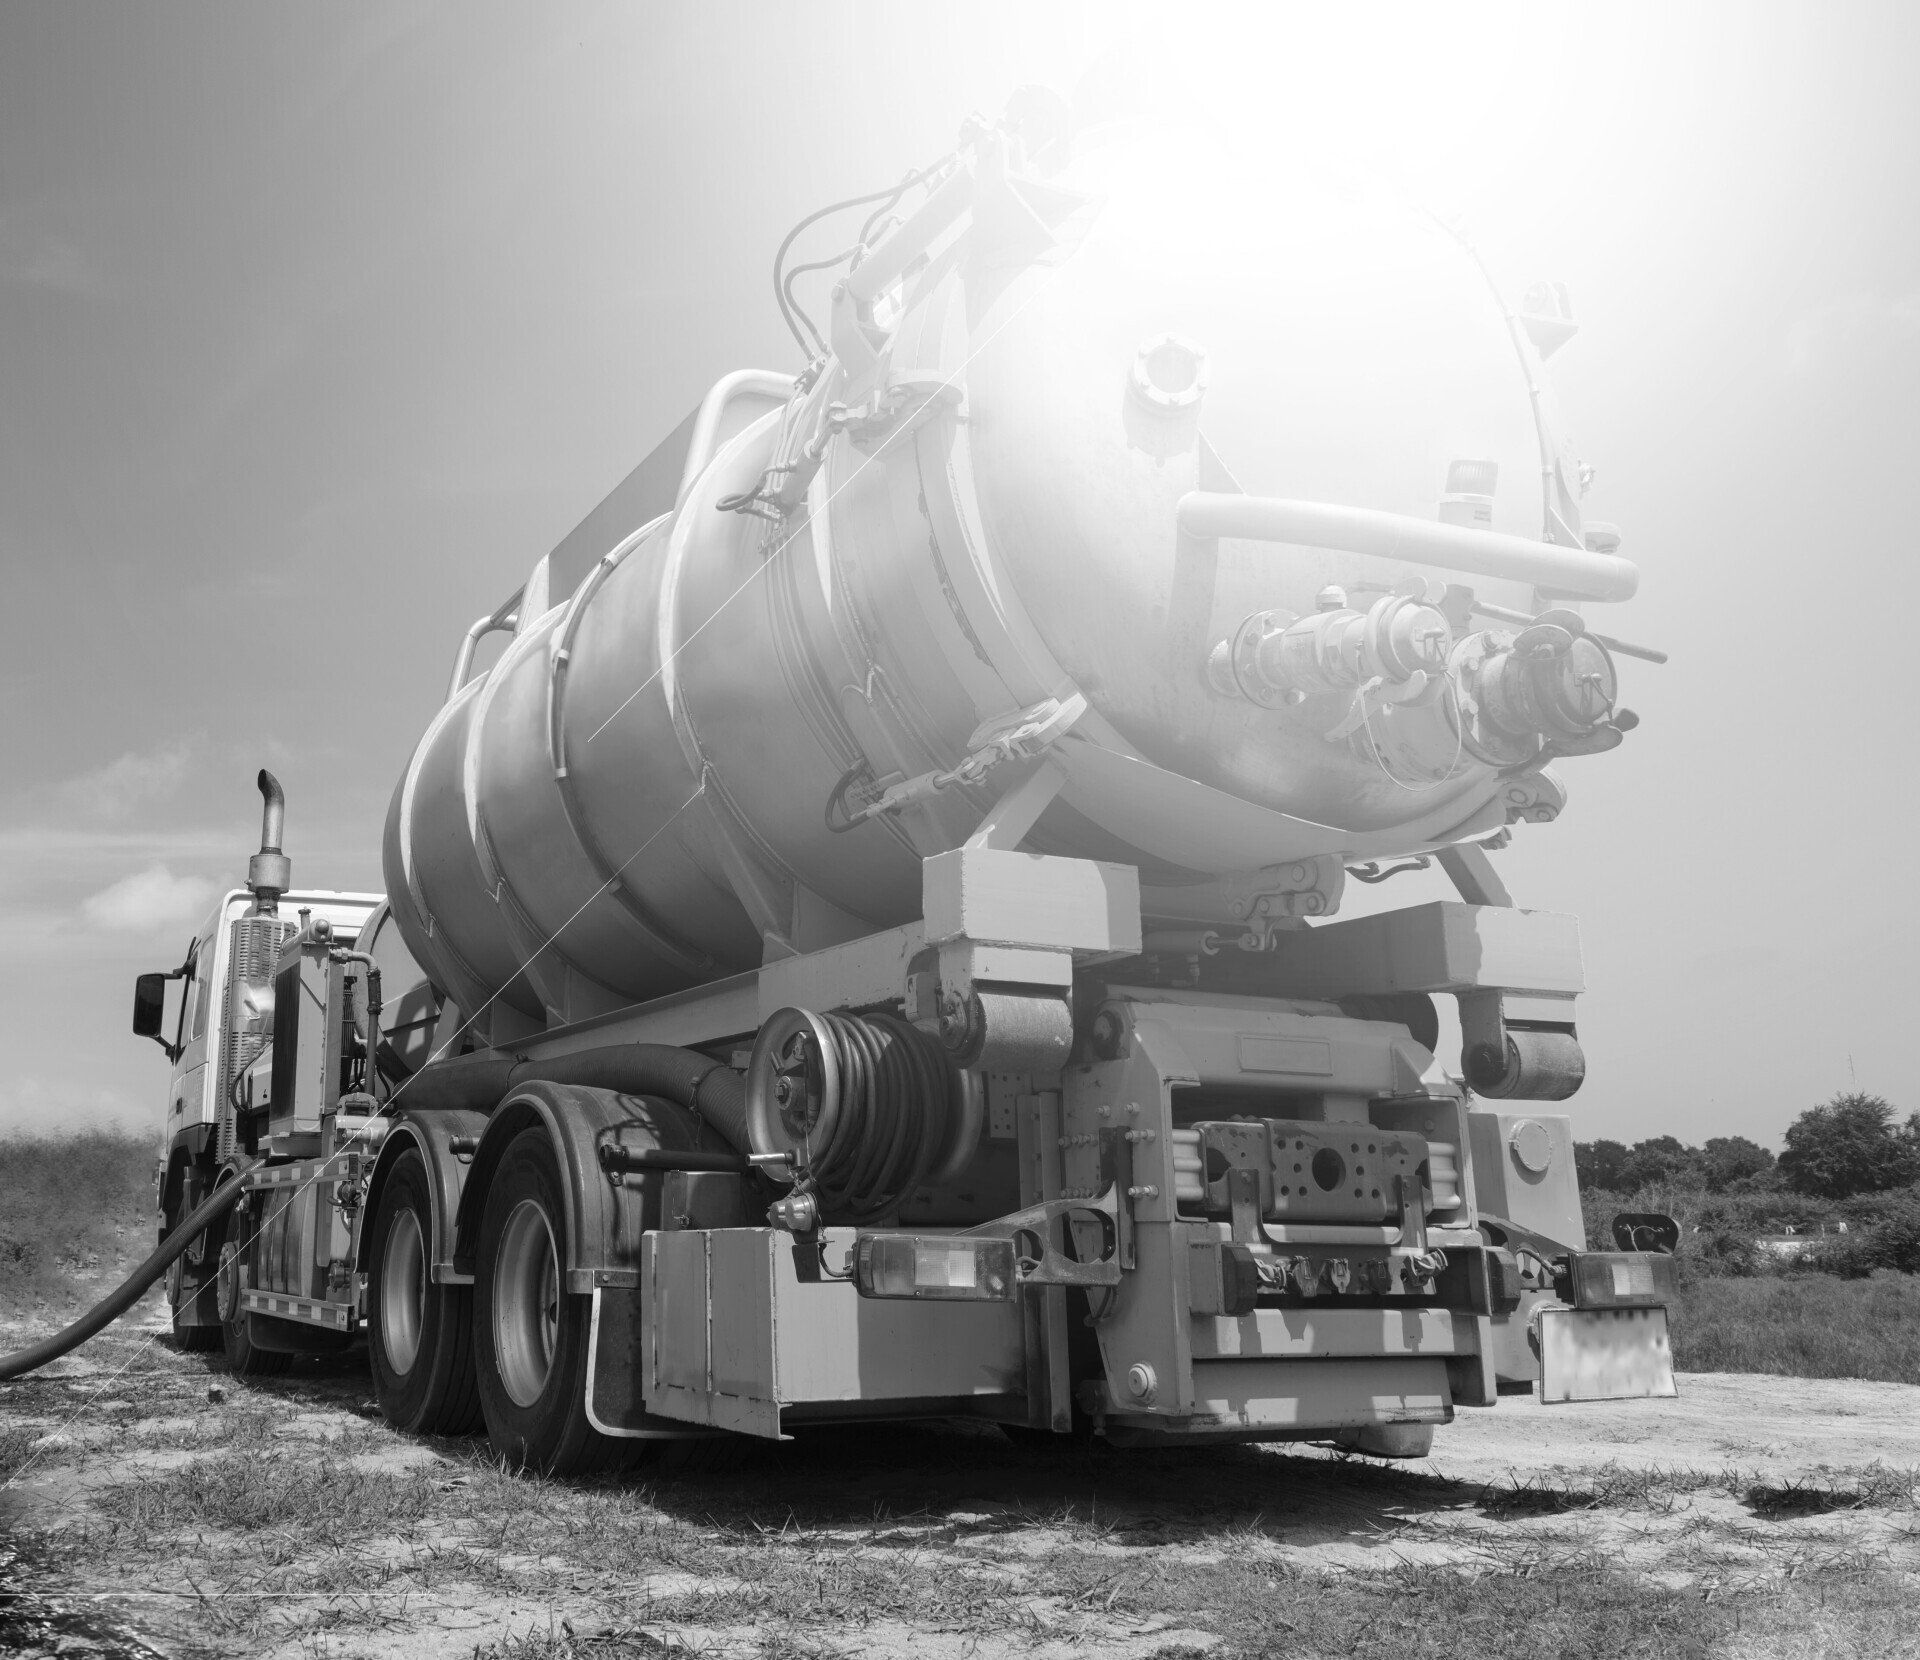 water truck services near me. water truck services